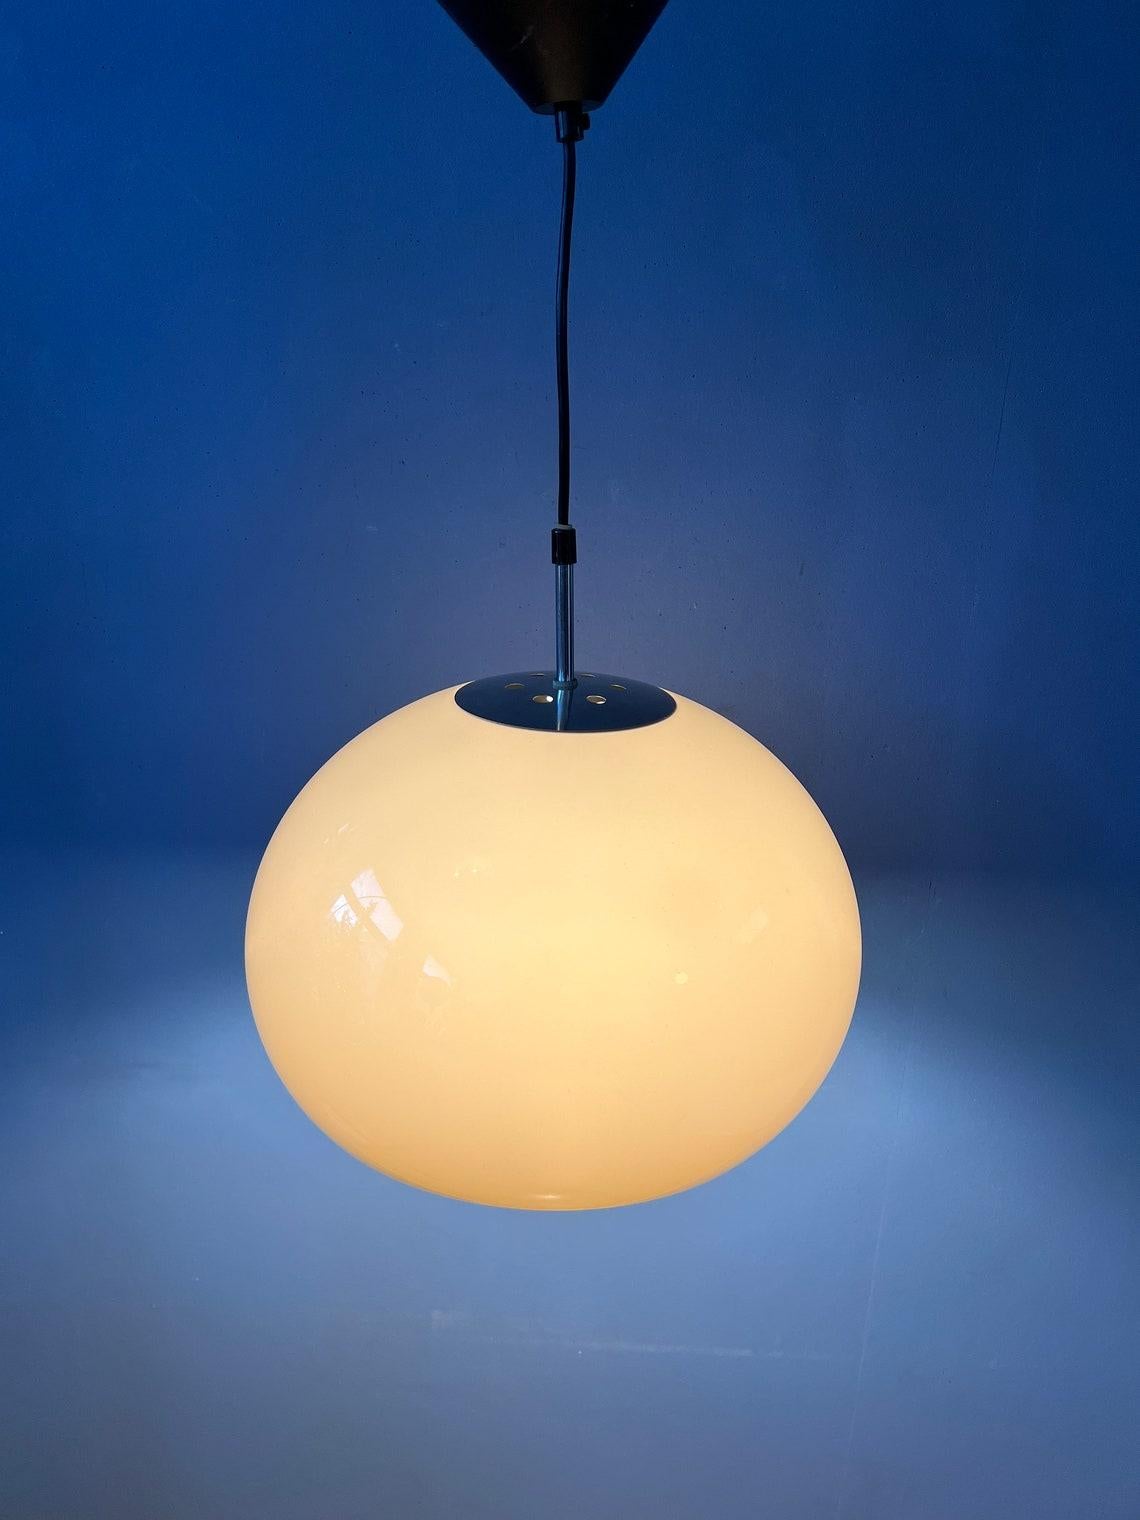 Space age mushroom pendant lamp by Dijkstra in beige/mocca colour and chrome top cap. The acrylic glass shade produces a magnificent glow. The lamps requires an E27/26 (standard) lightbulb.

Additional information:
Materials: Metal, plastic
Period: